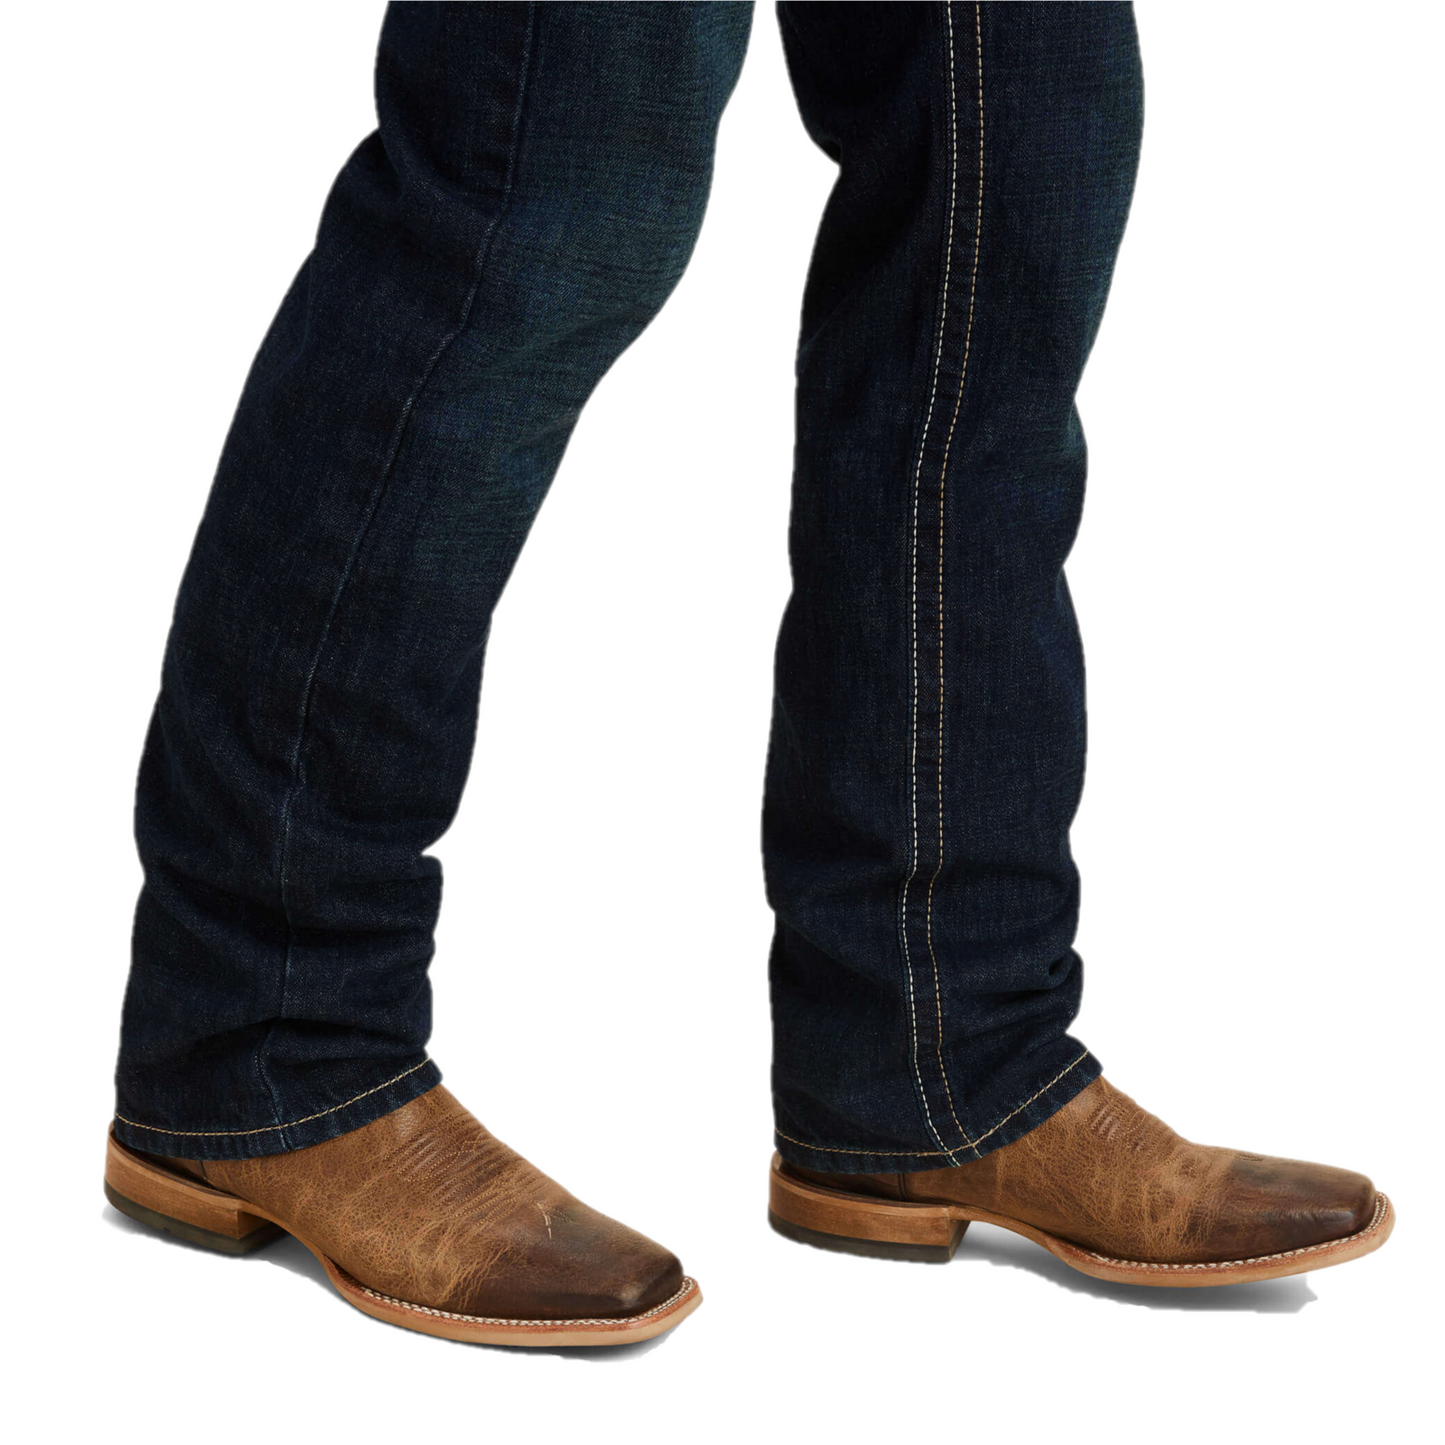 Load image into Gallery viewer, Ariat® Men&amp;#39;s M5 Roadhouse Dark Wash Straight Leg Jeans 10043189
